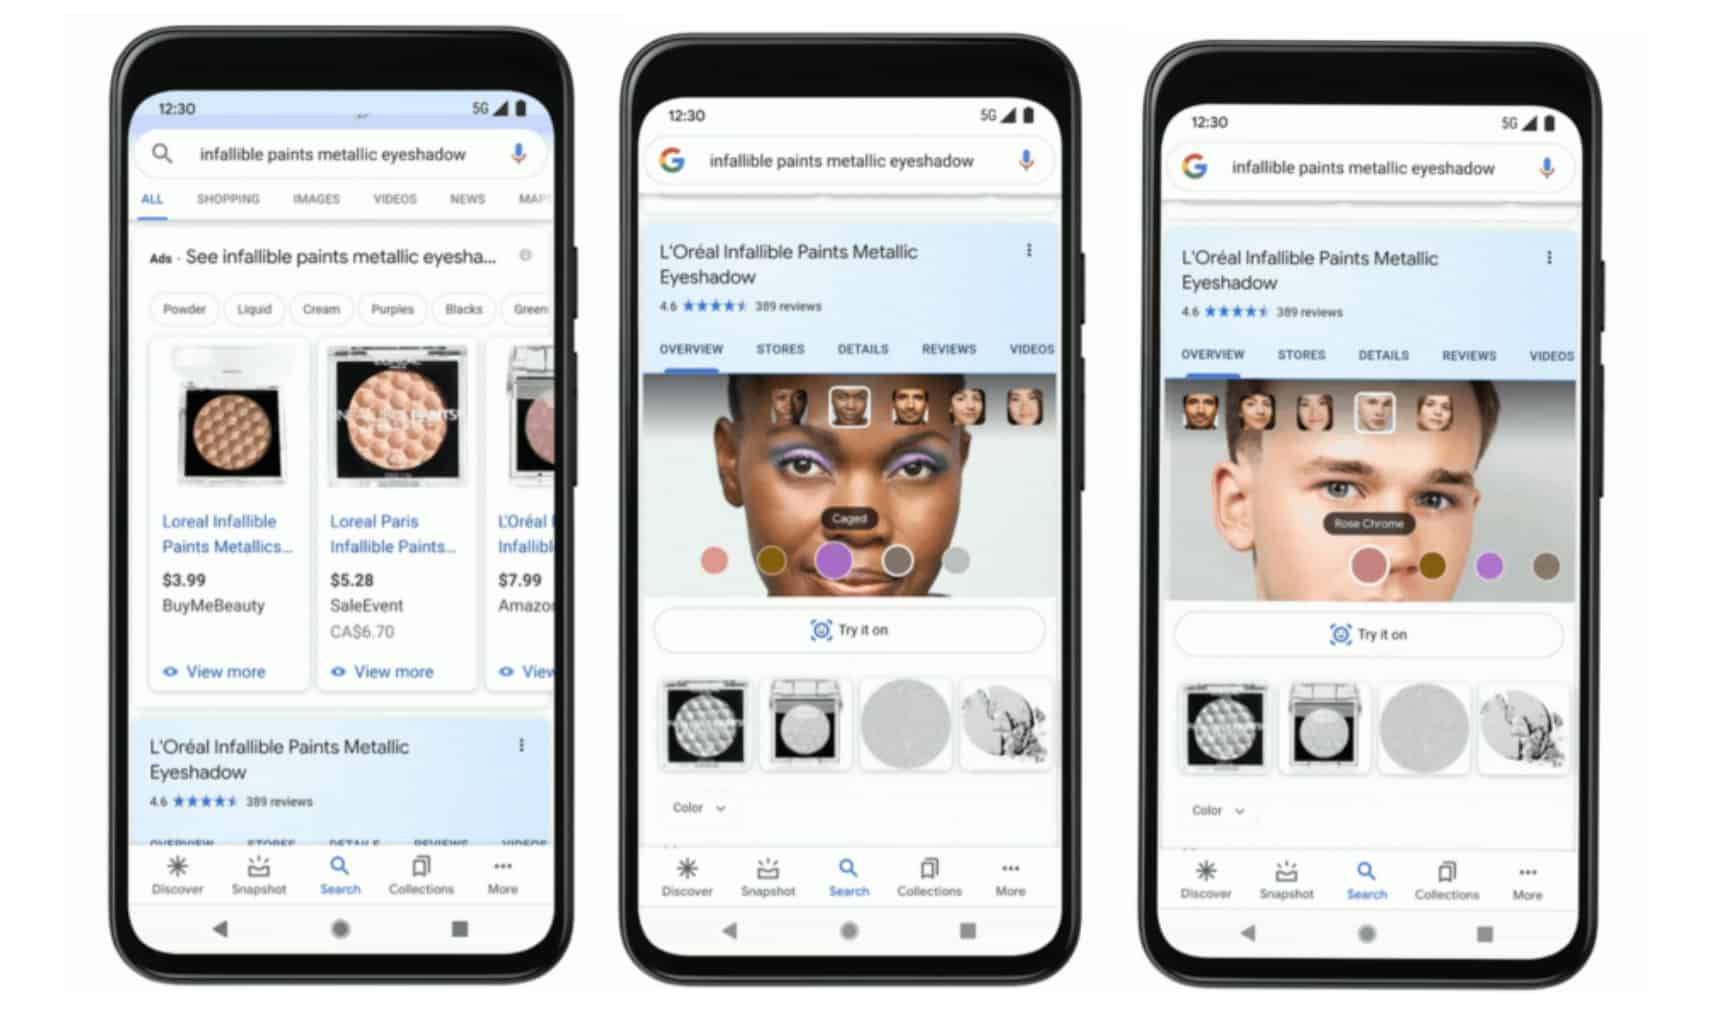 Google Now Lets Shoppers Virtually Try On Makeup Products Before Buying Them